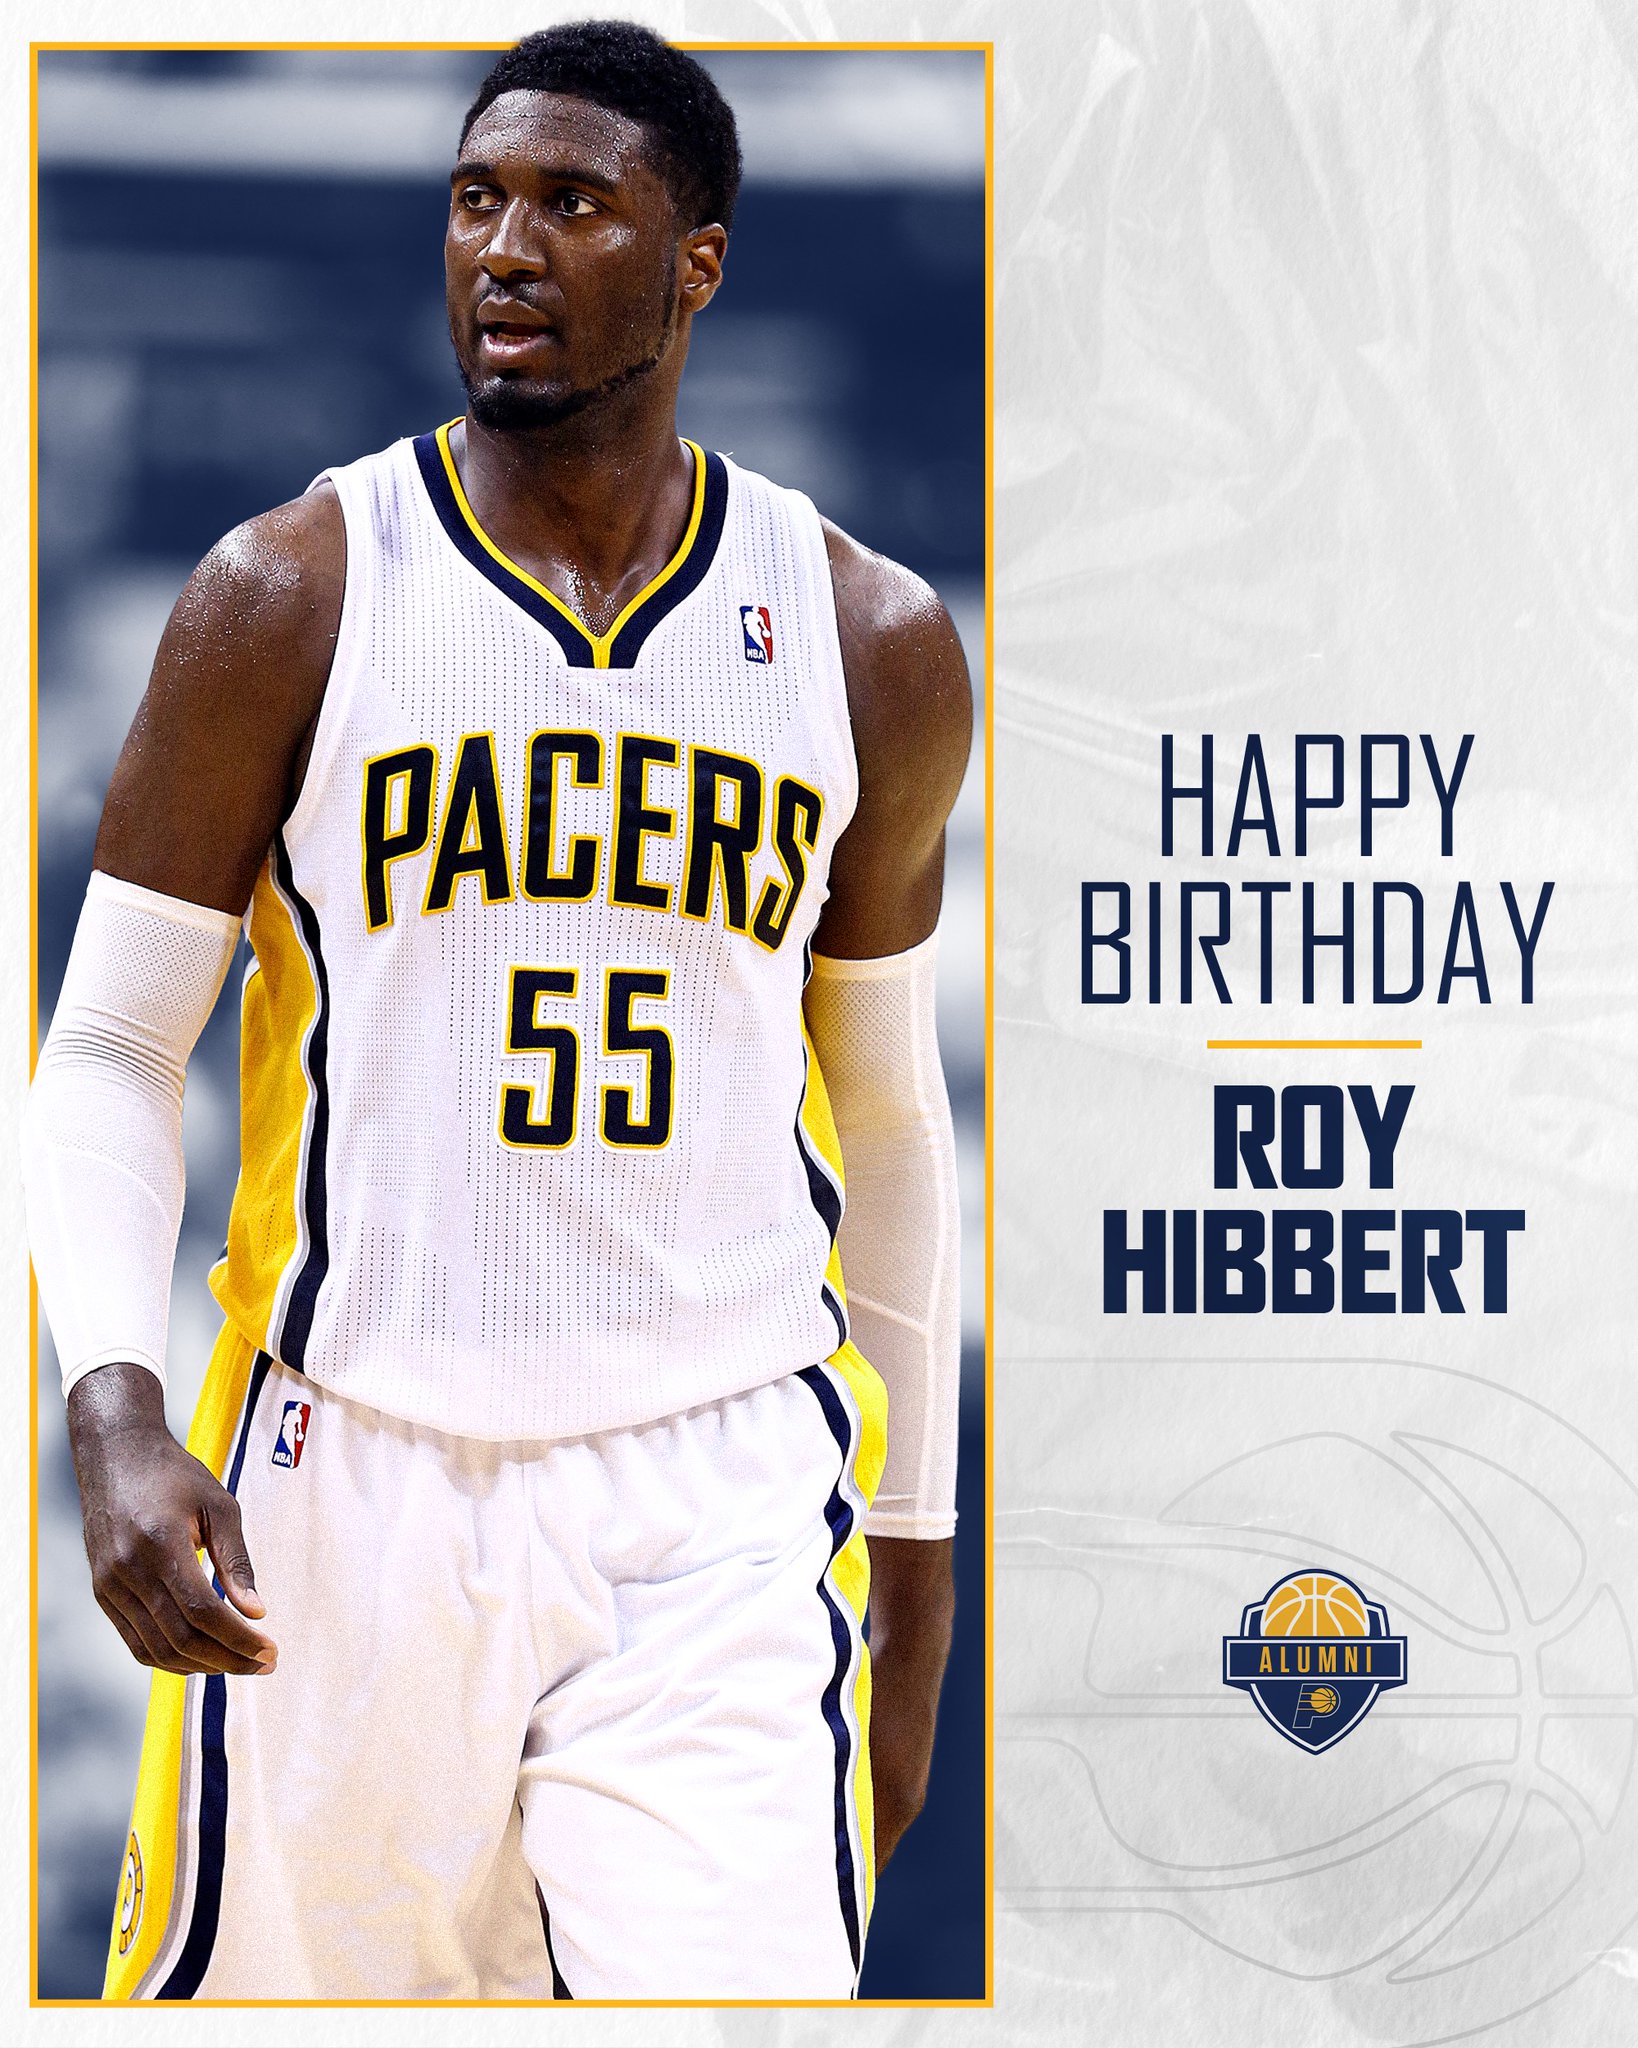 Happy birthday to the one and only Roy Hibbert! 